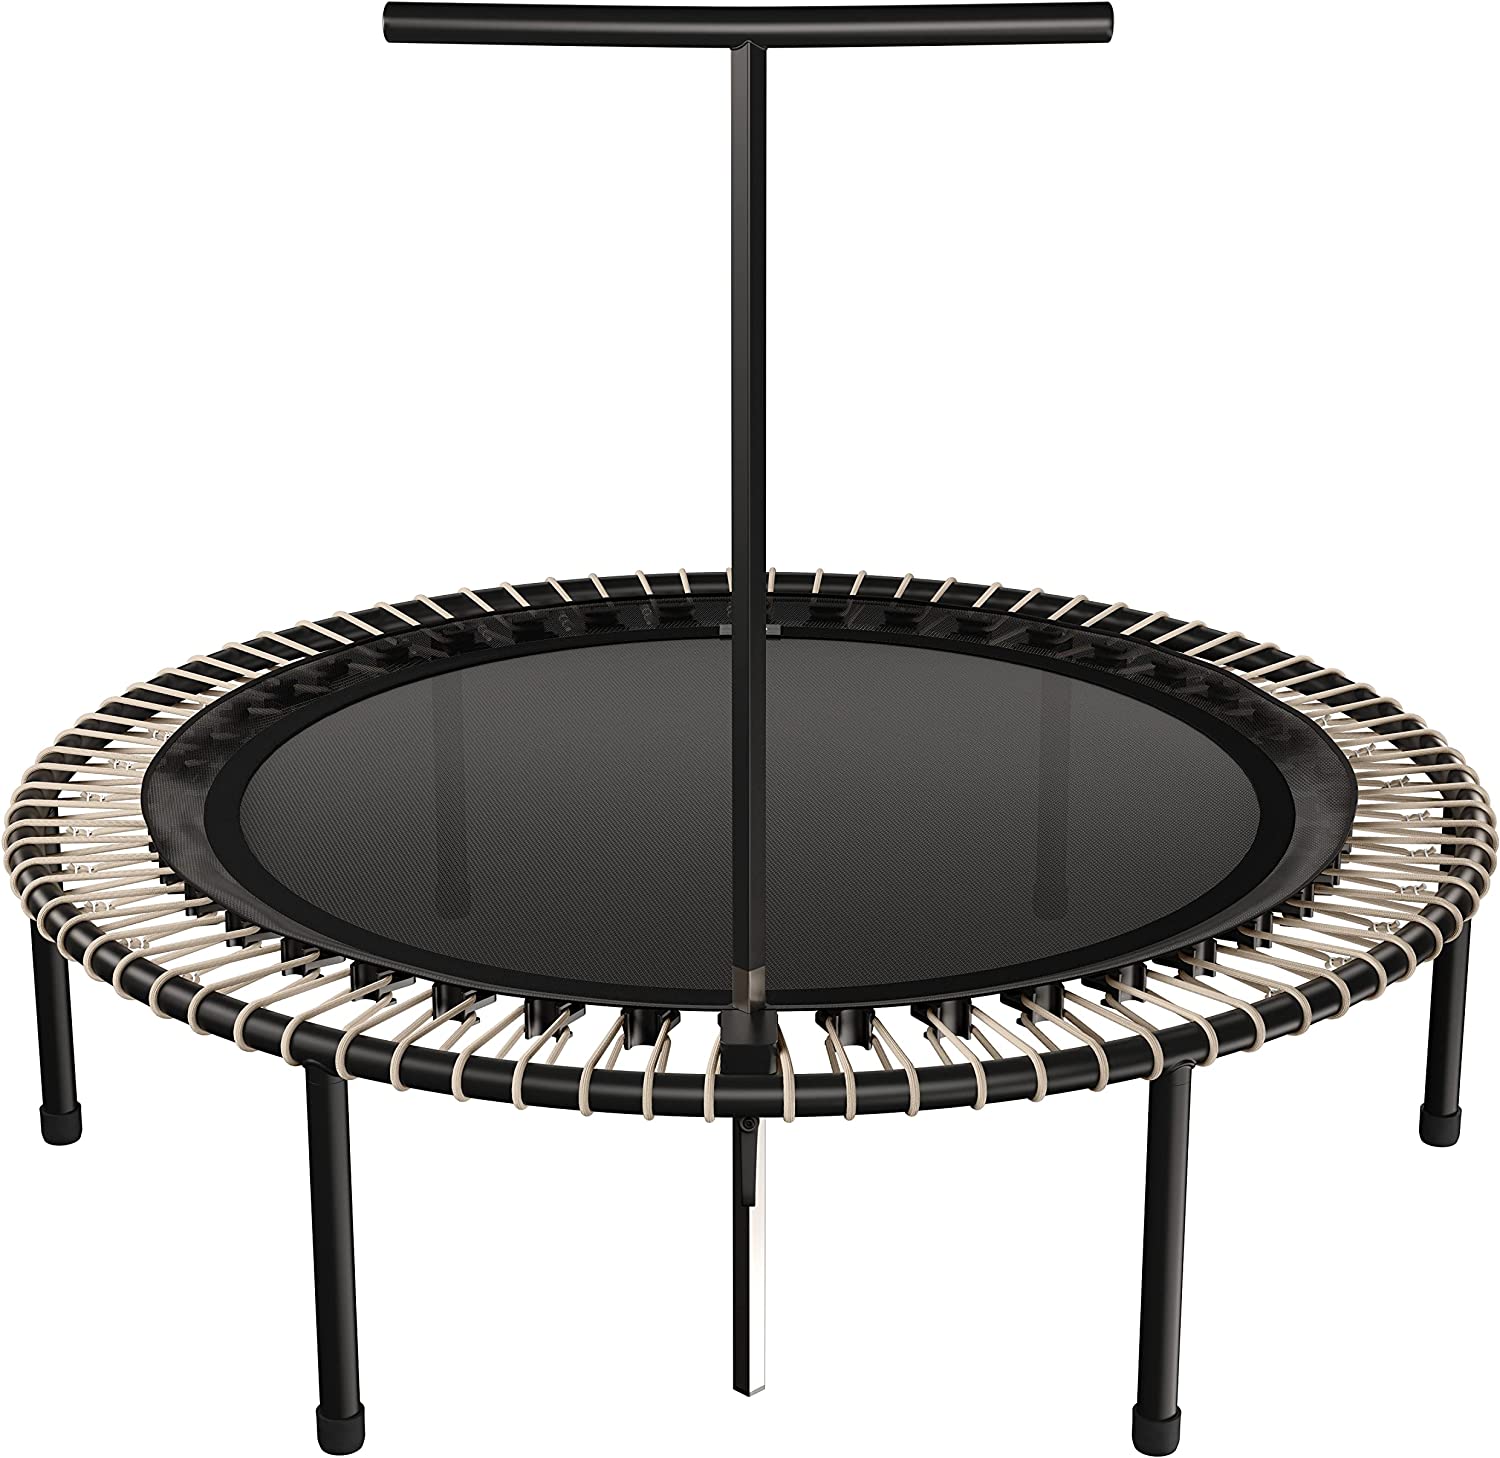 7 Best Rebounder Trampoline: Expect Review & Guide [2023]